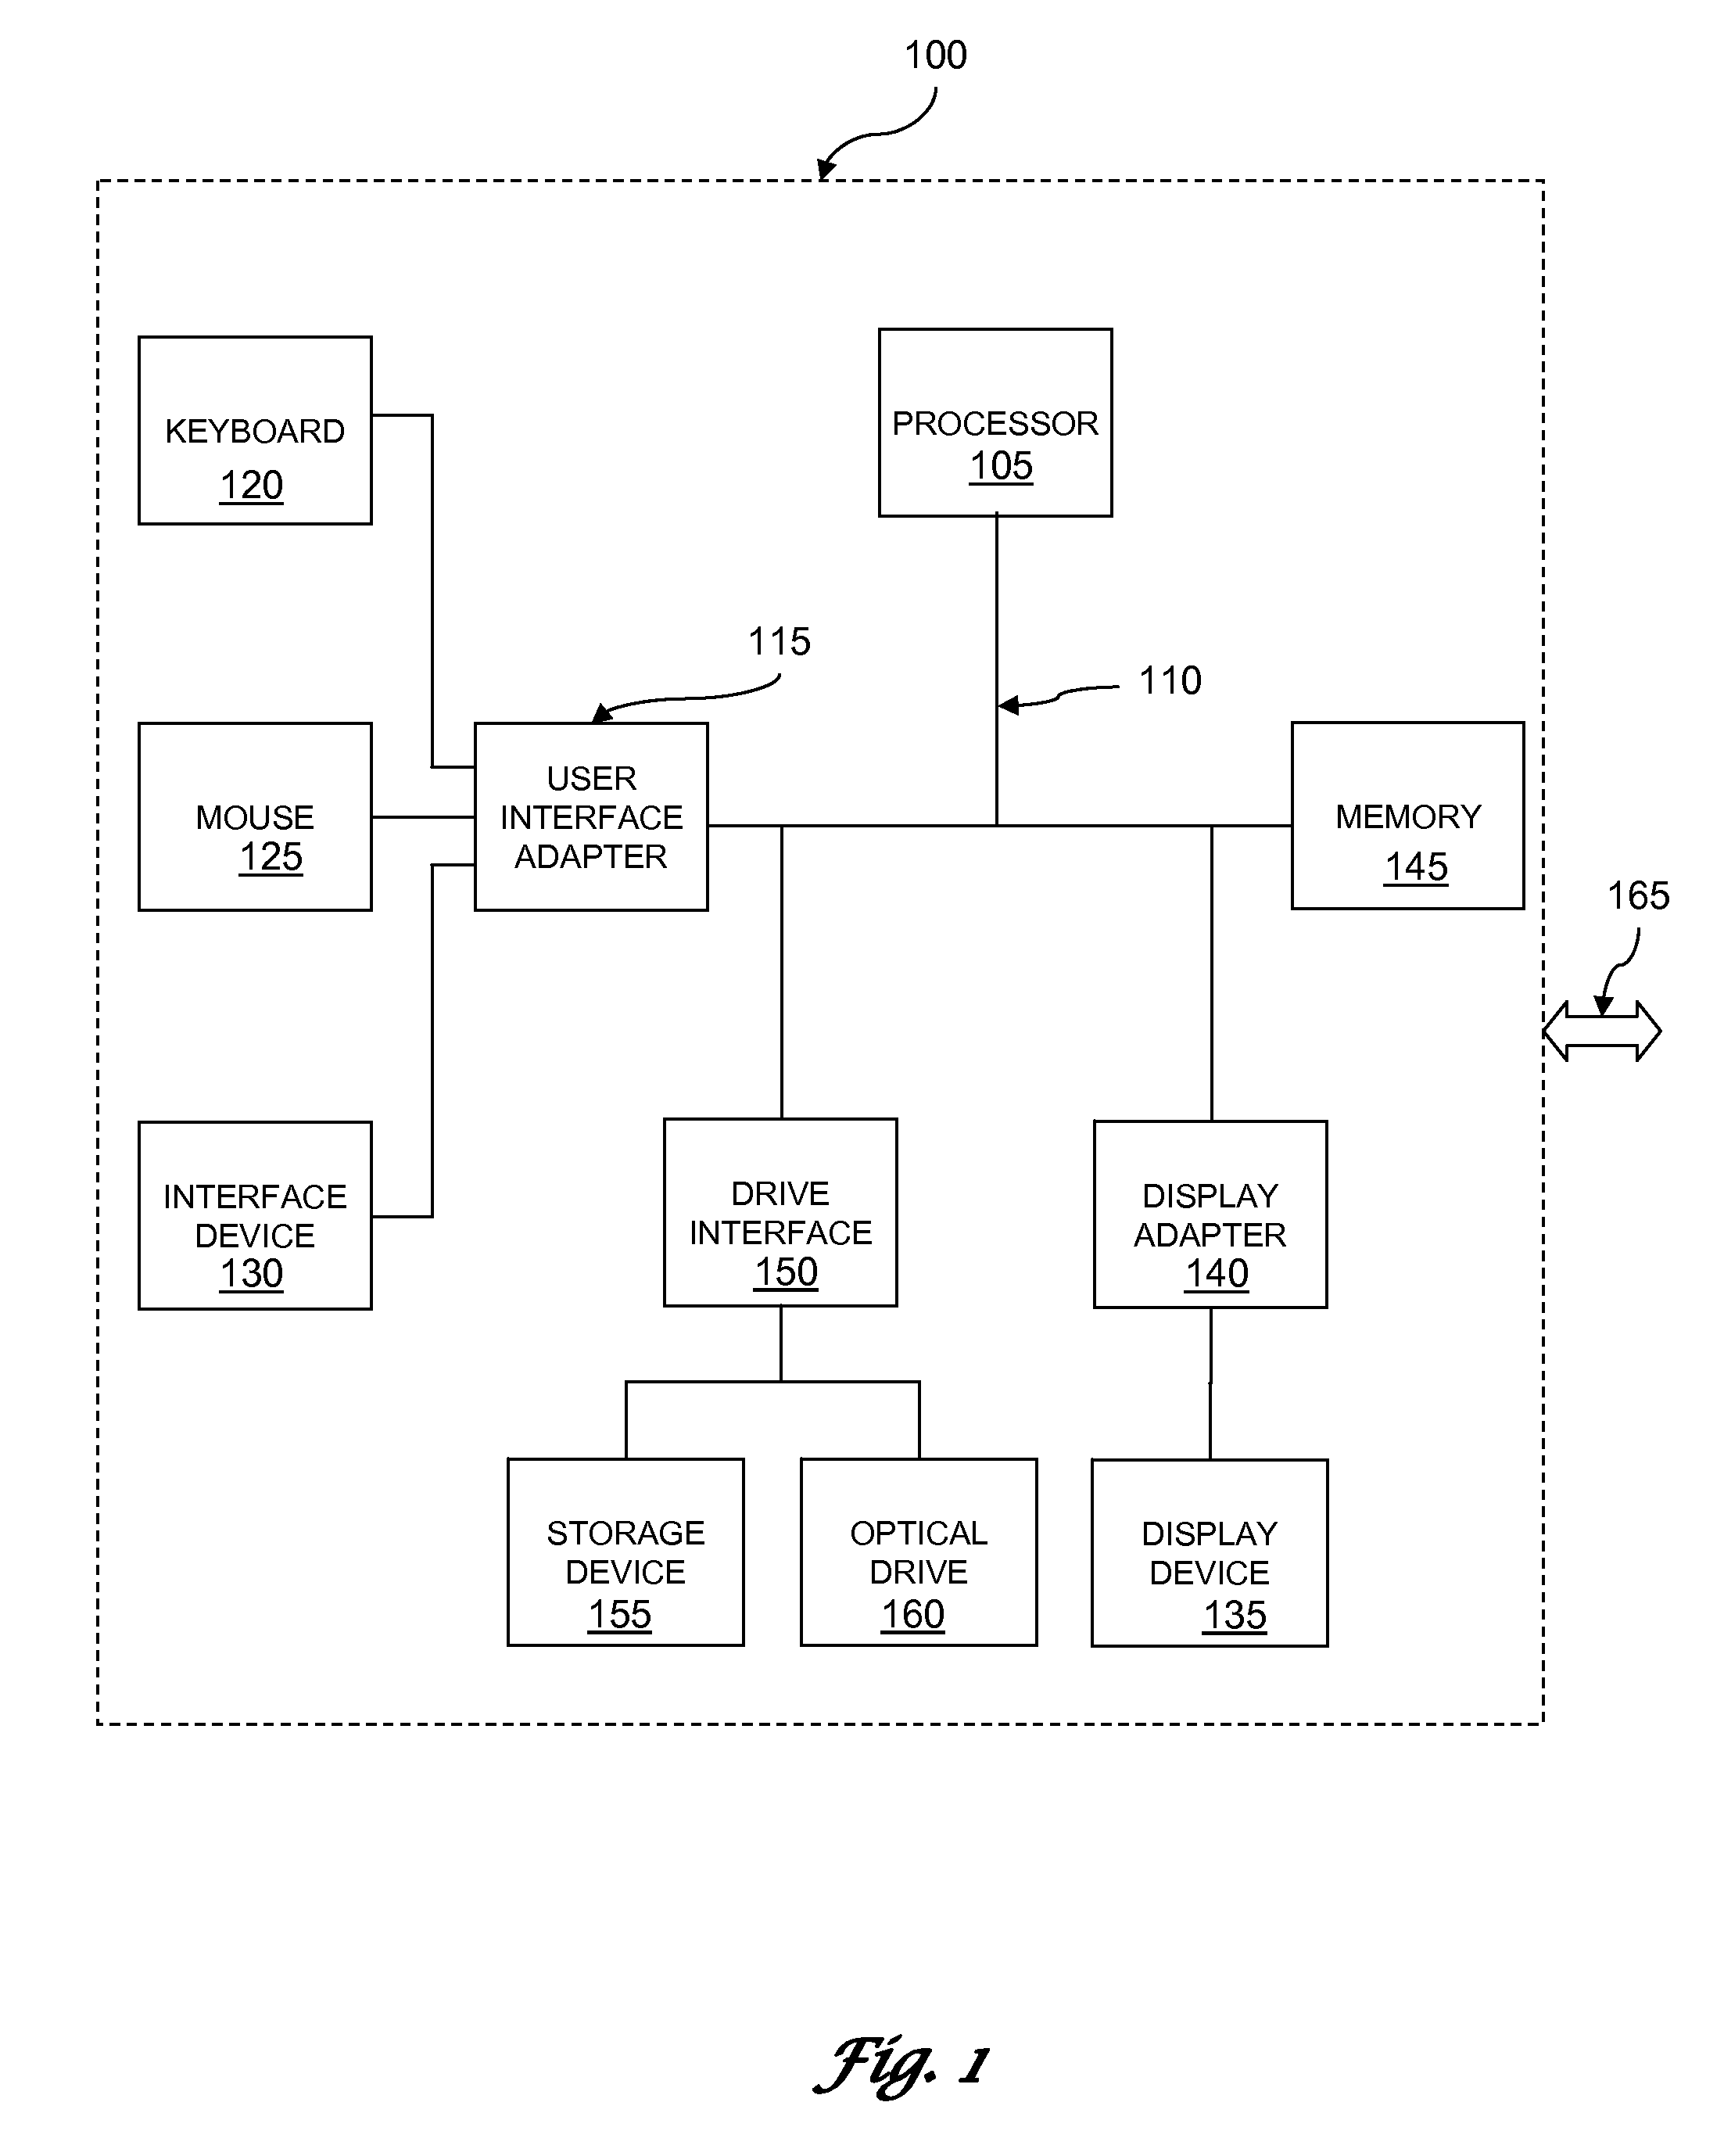 System and method to determine a simplified representation of a model